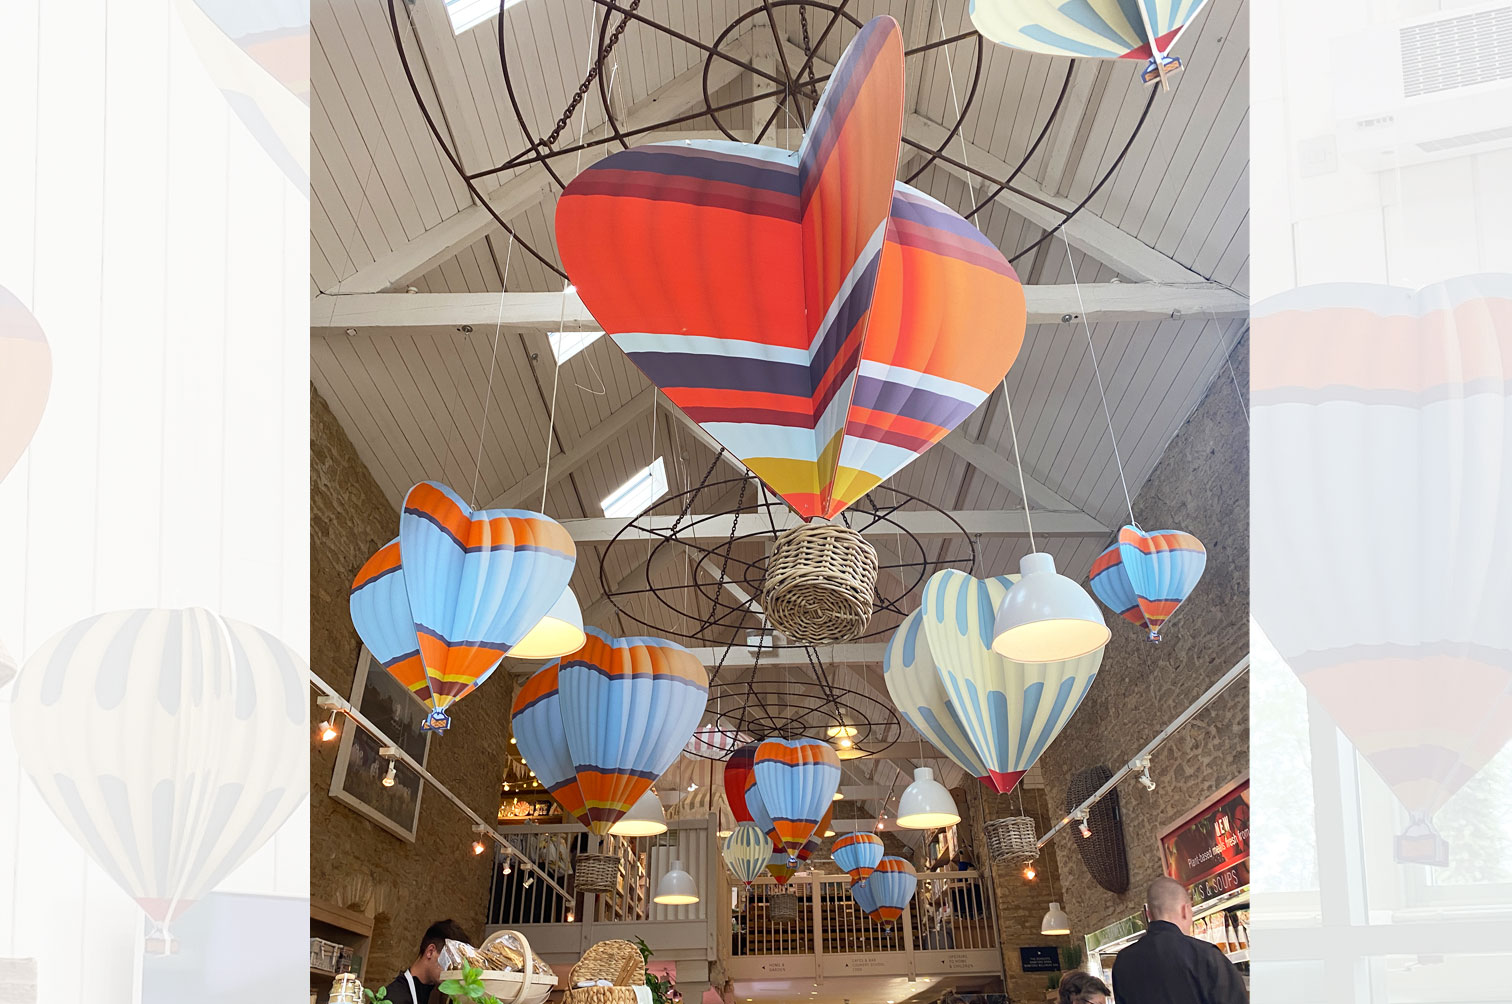 Shop display of wood slot together hanging hot air balloons for Daylesford Farm.